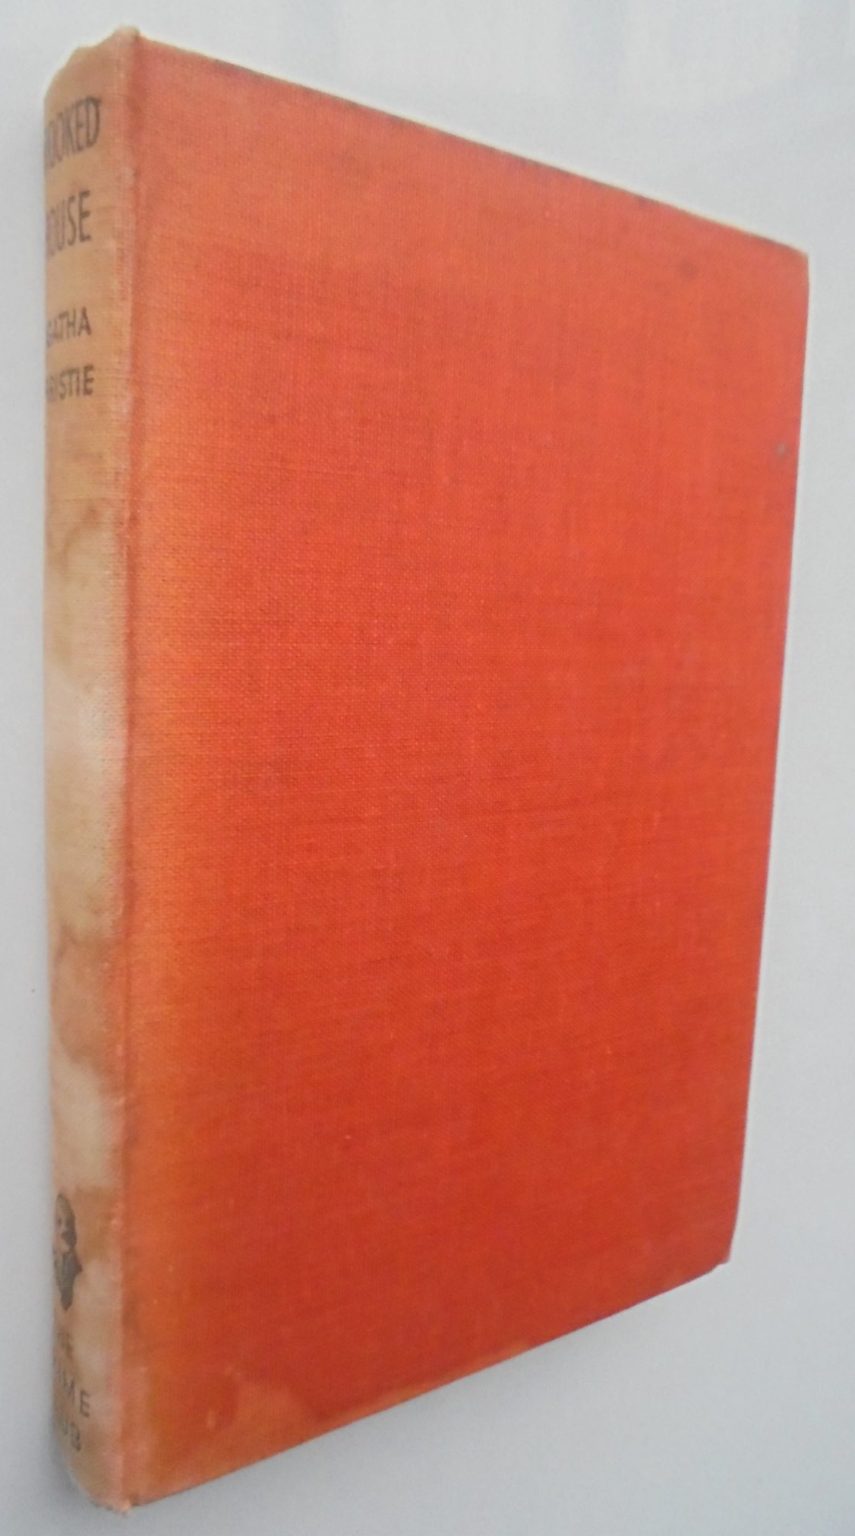 Crooked House. 1949 First Edition. By Agatha Christie